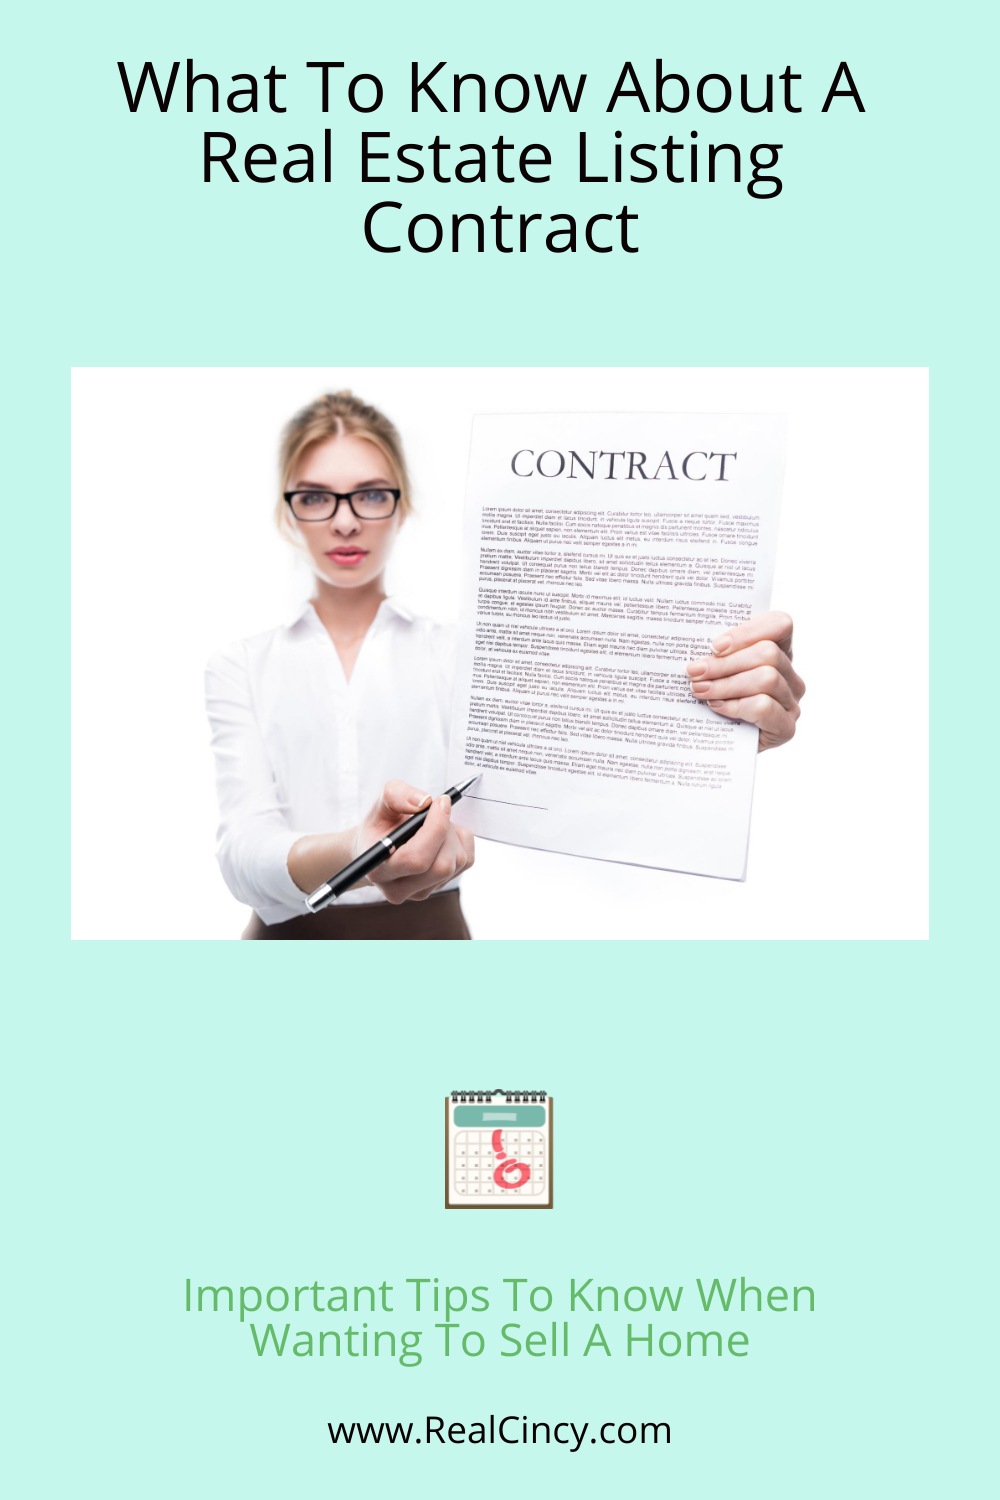 Tips For Understanding The Listing Contract When Putting Your Home Up For Sale